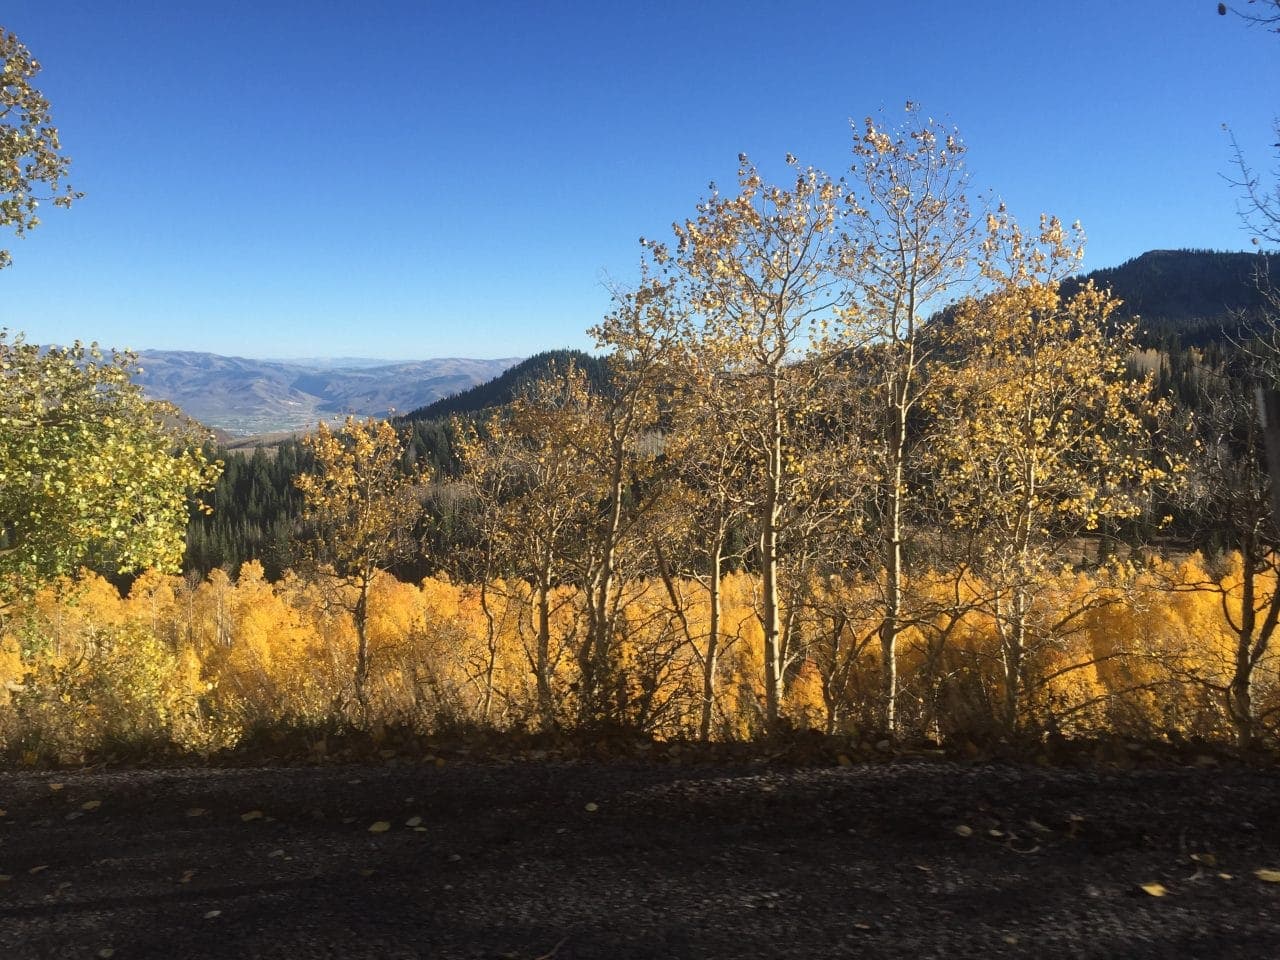 Golden-colored aspen trees in the fall